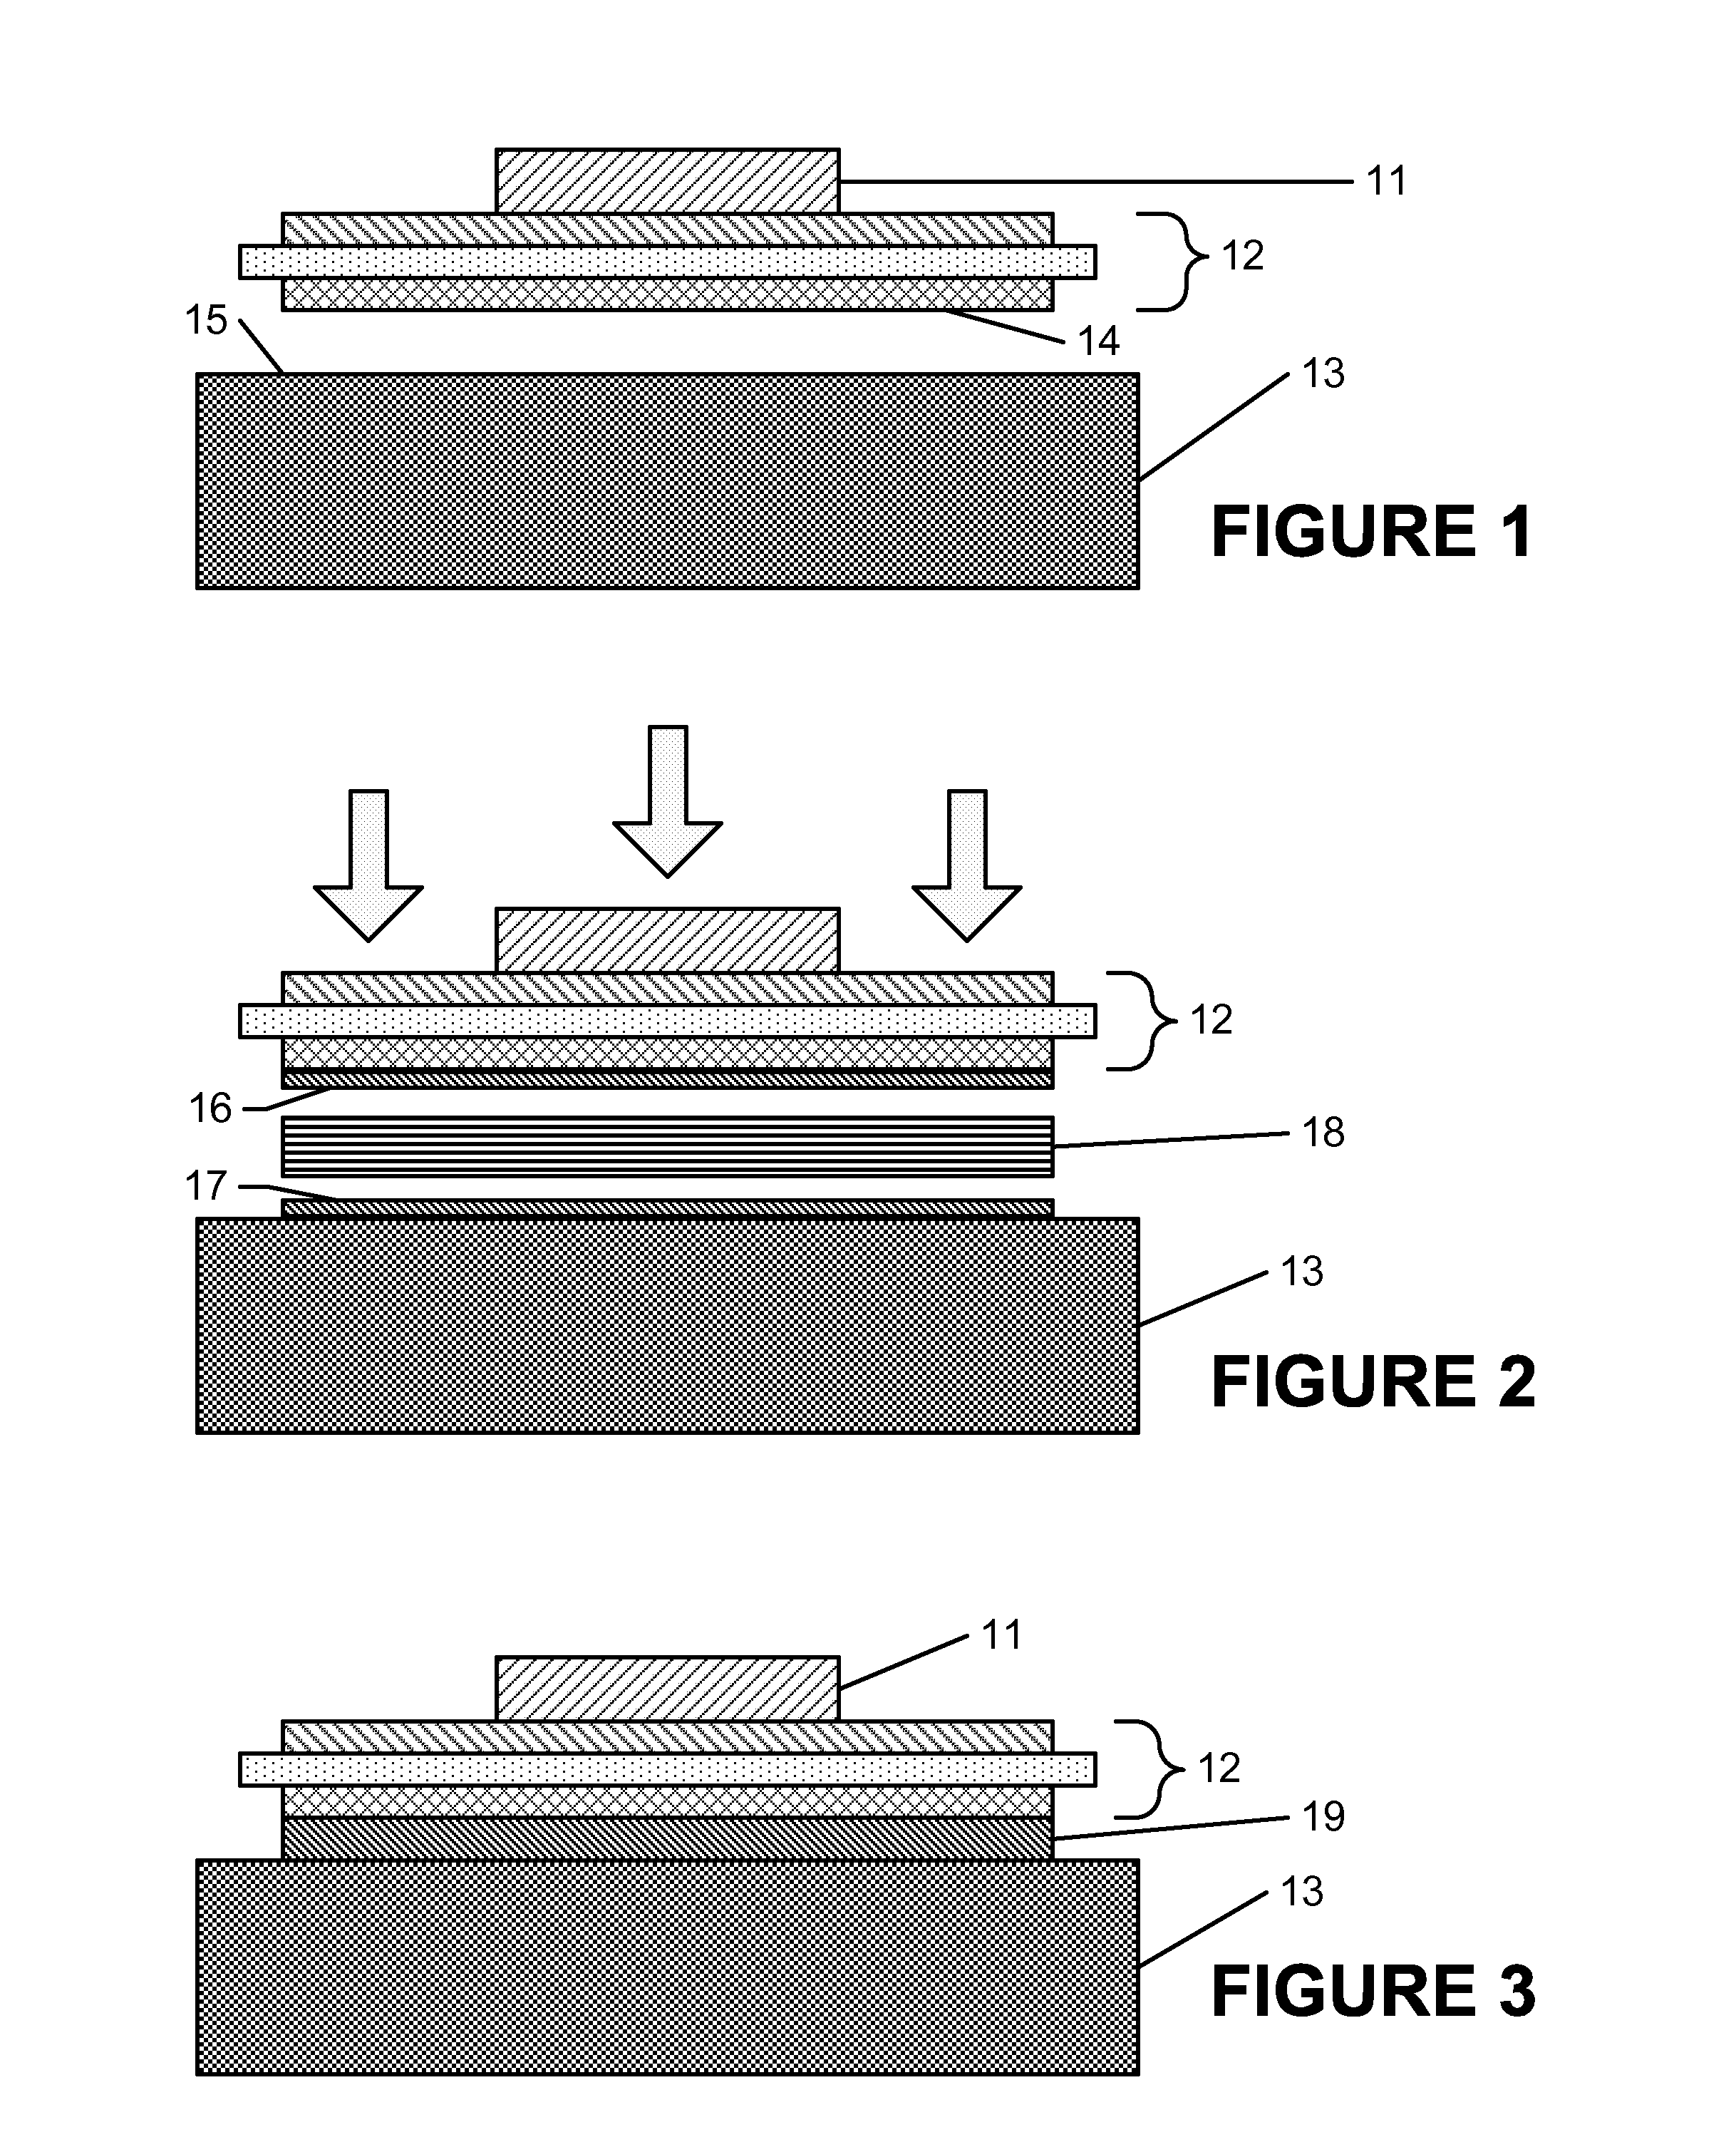 Method For Bonding Of Concentrating Photovoltaic Receiver Module To Heat Sink Using Foil And Solder